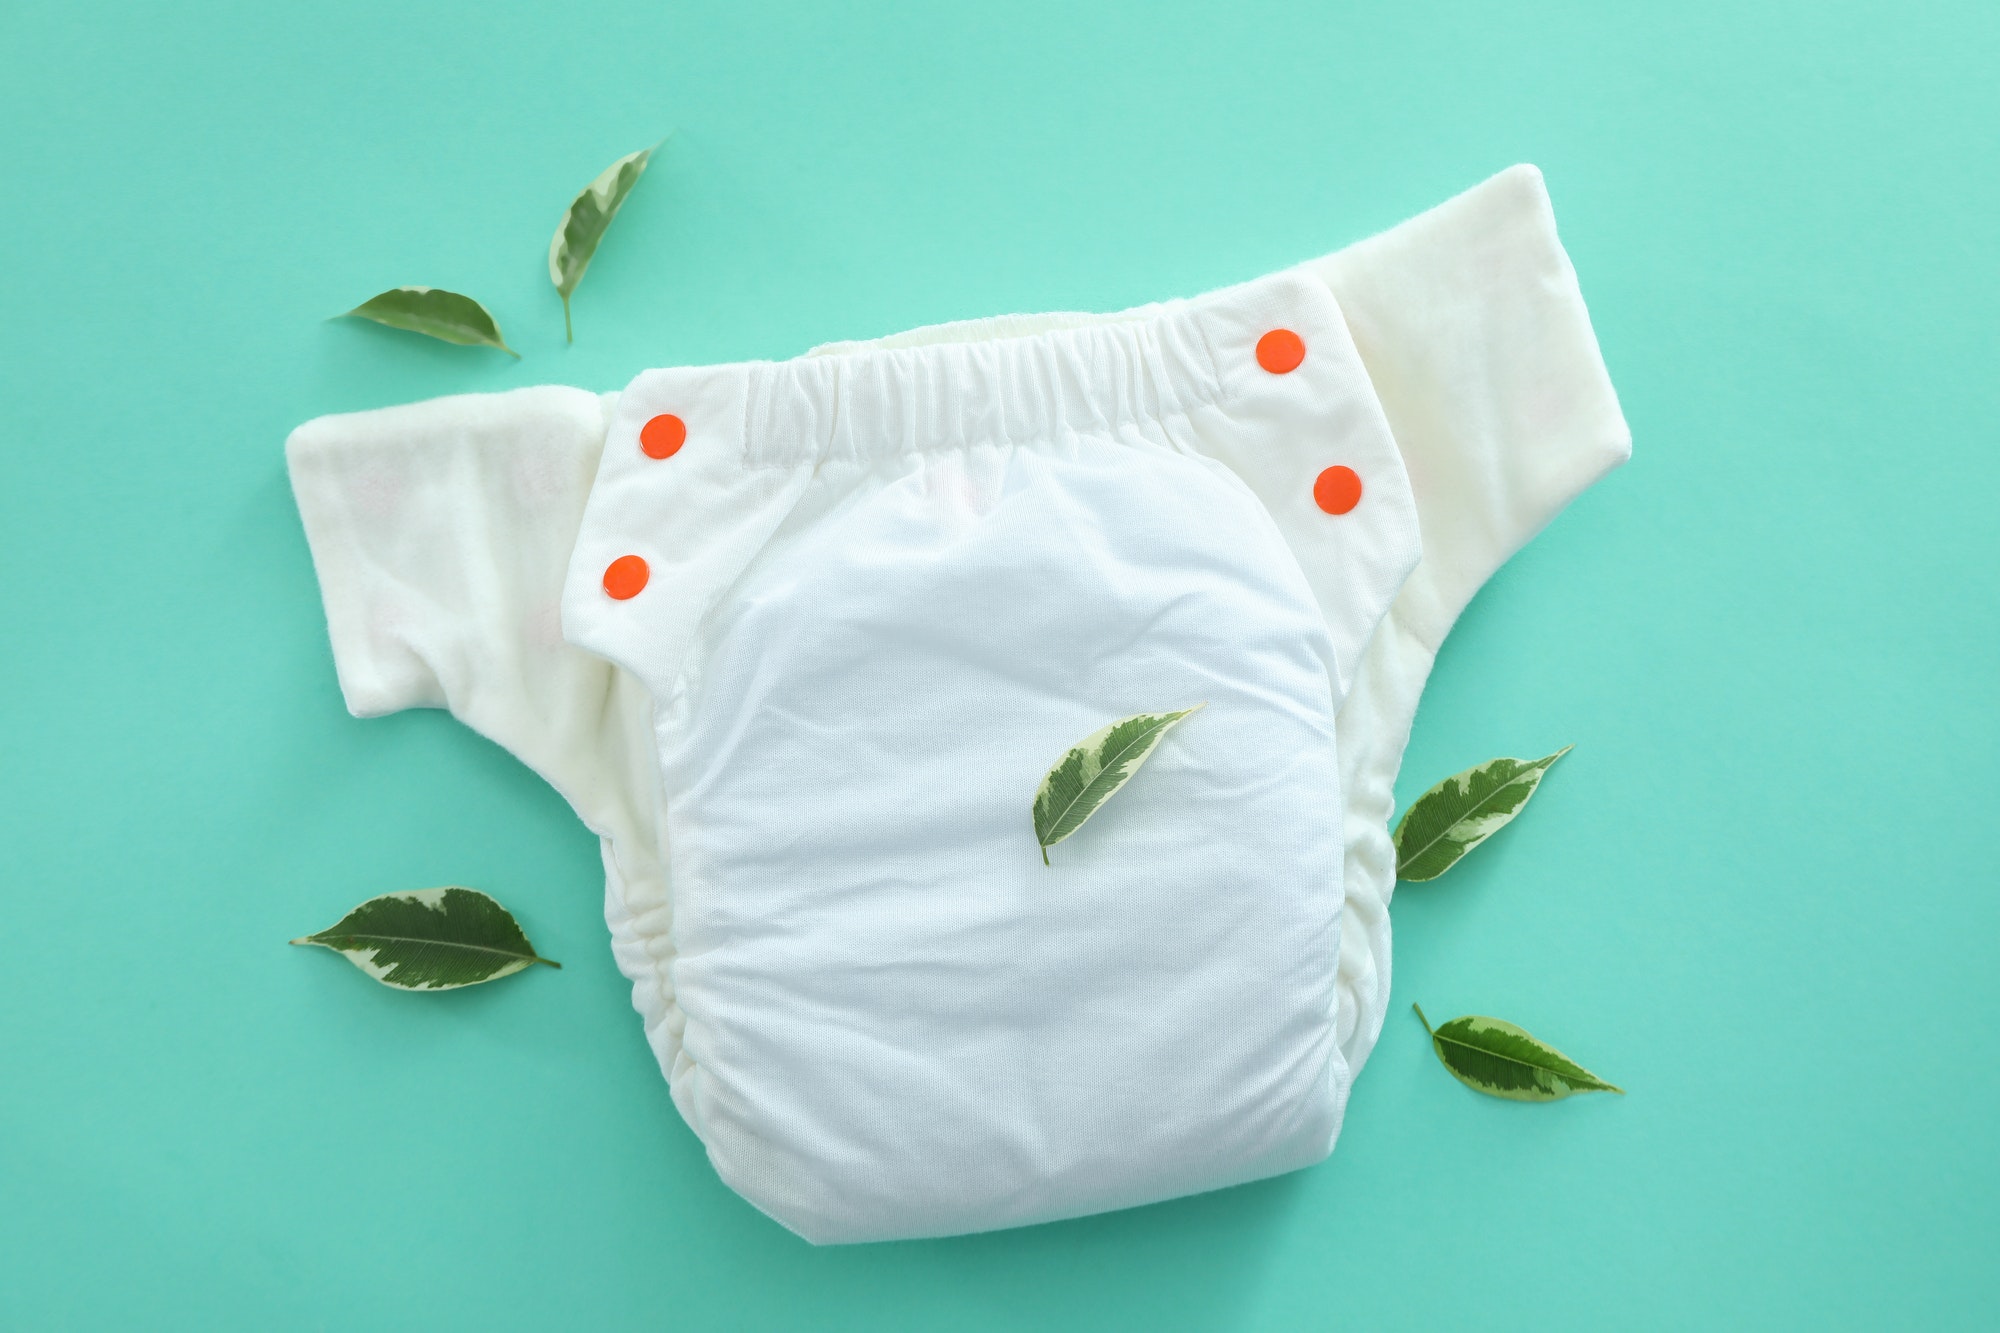 pampers 4 active baby dry